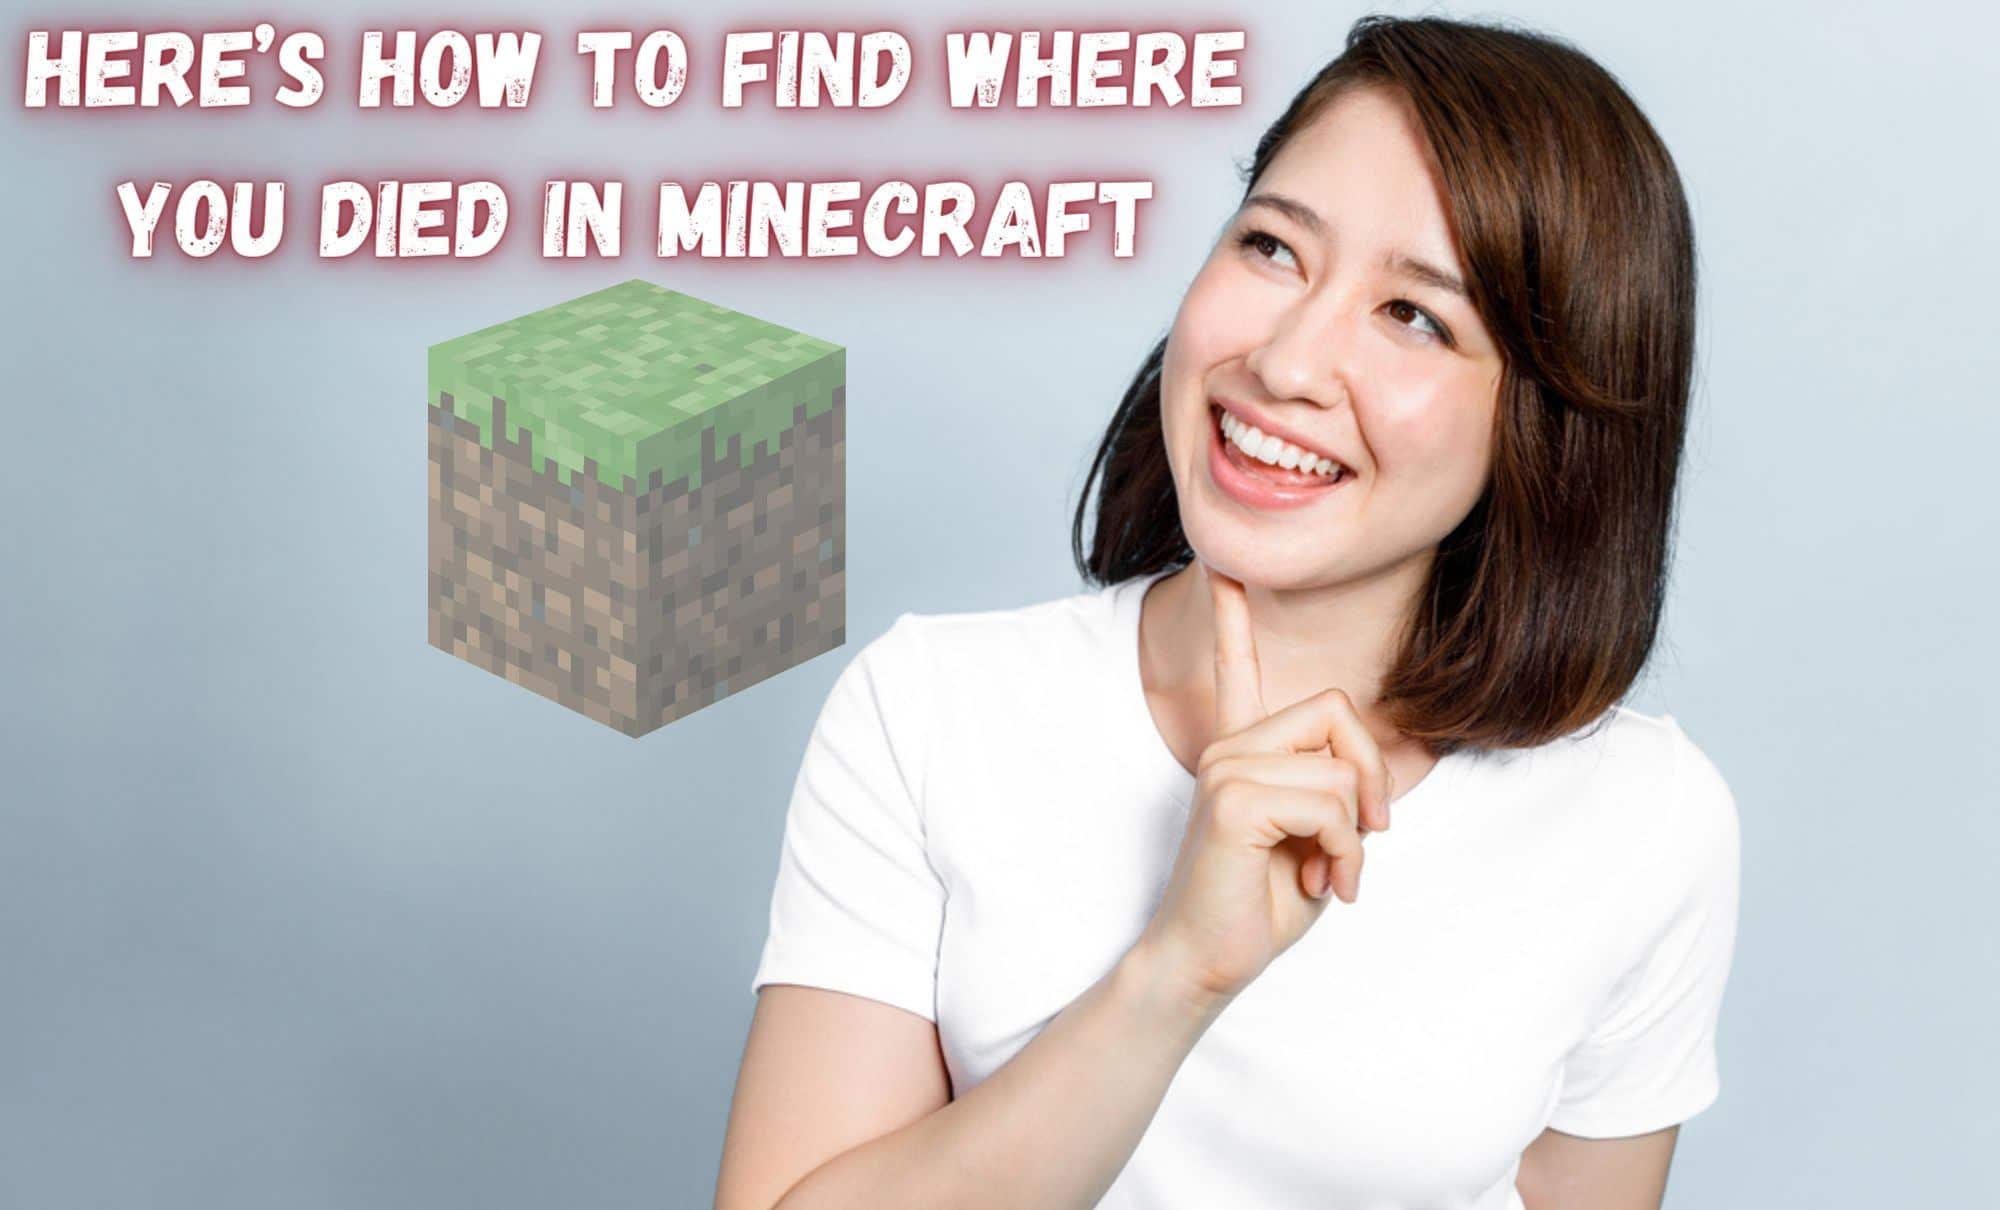 Heres How To Find Where You Died In Minecraft